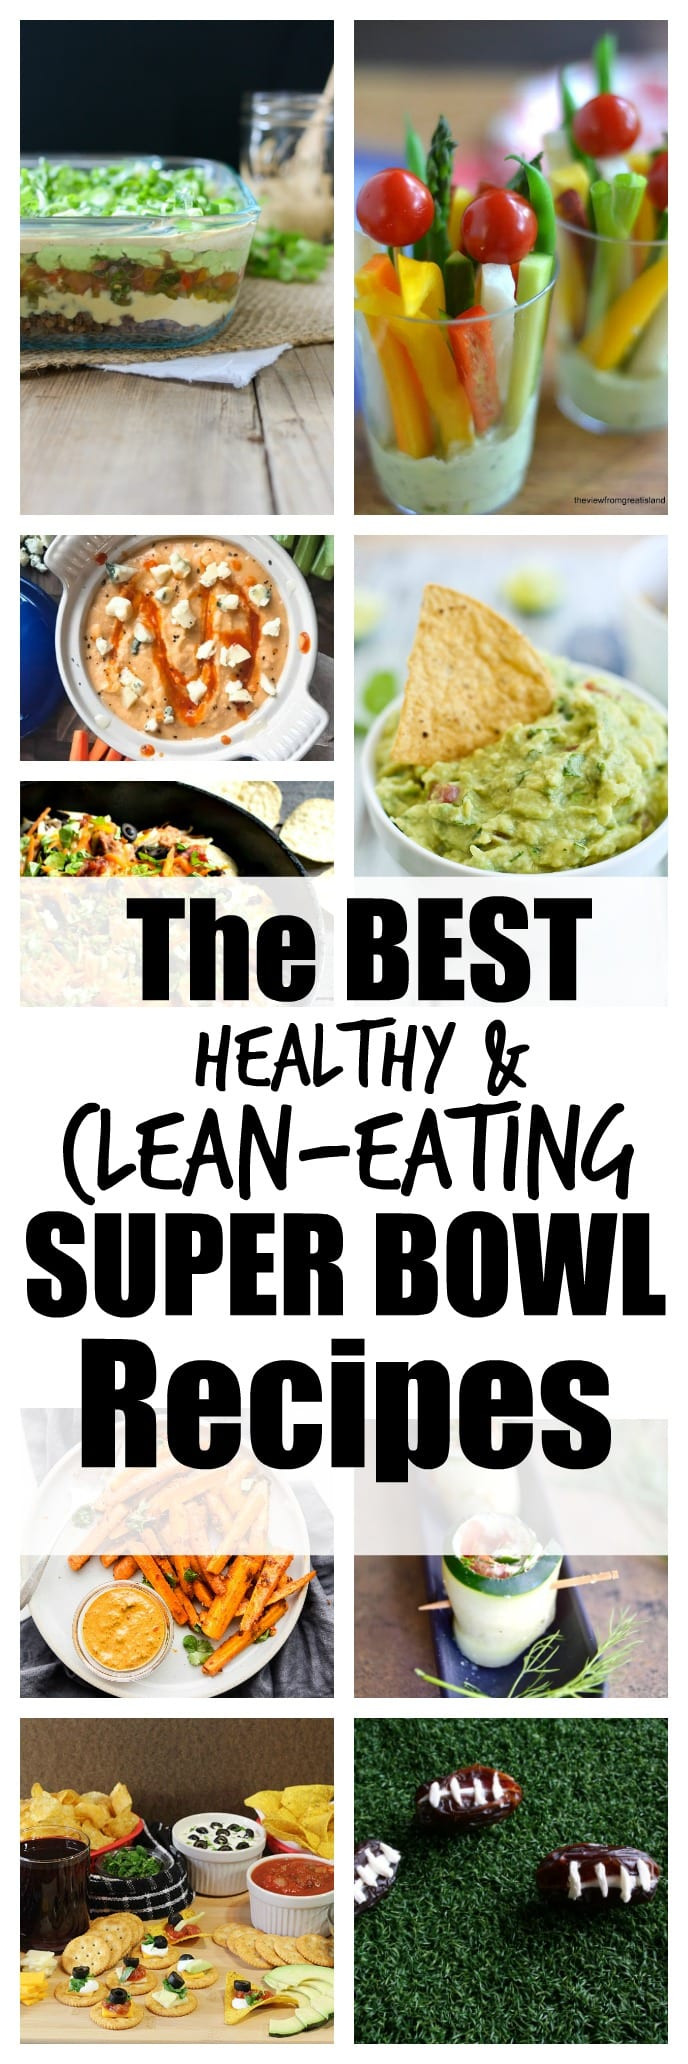 Clean Eating Super Bowl Recipes
 Healthy and Clean Eating Super Bowl Recipes Happy